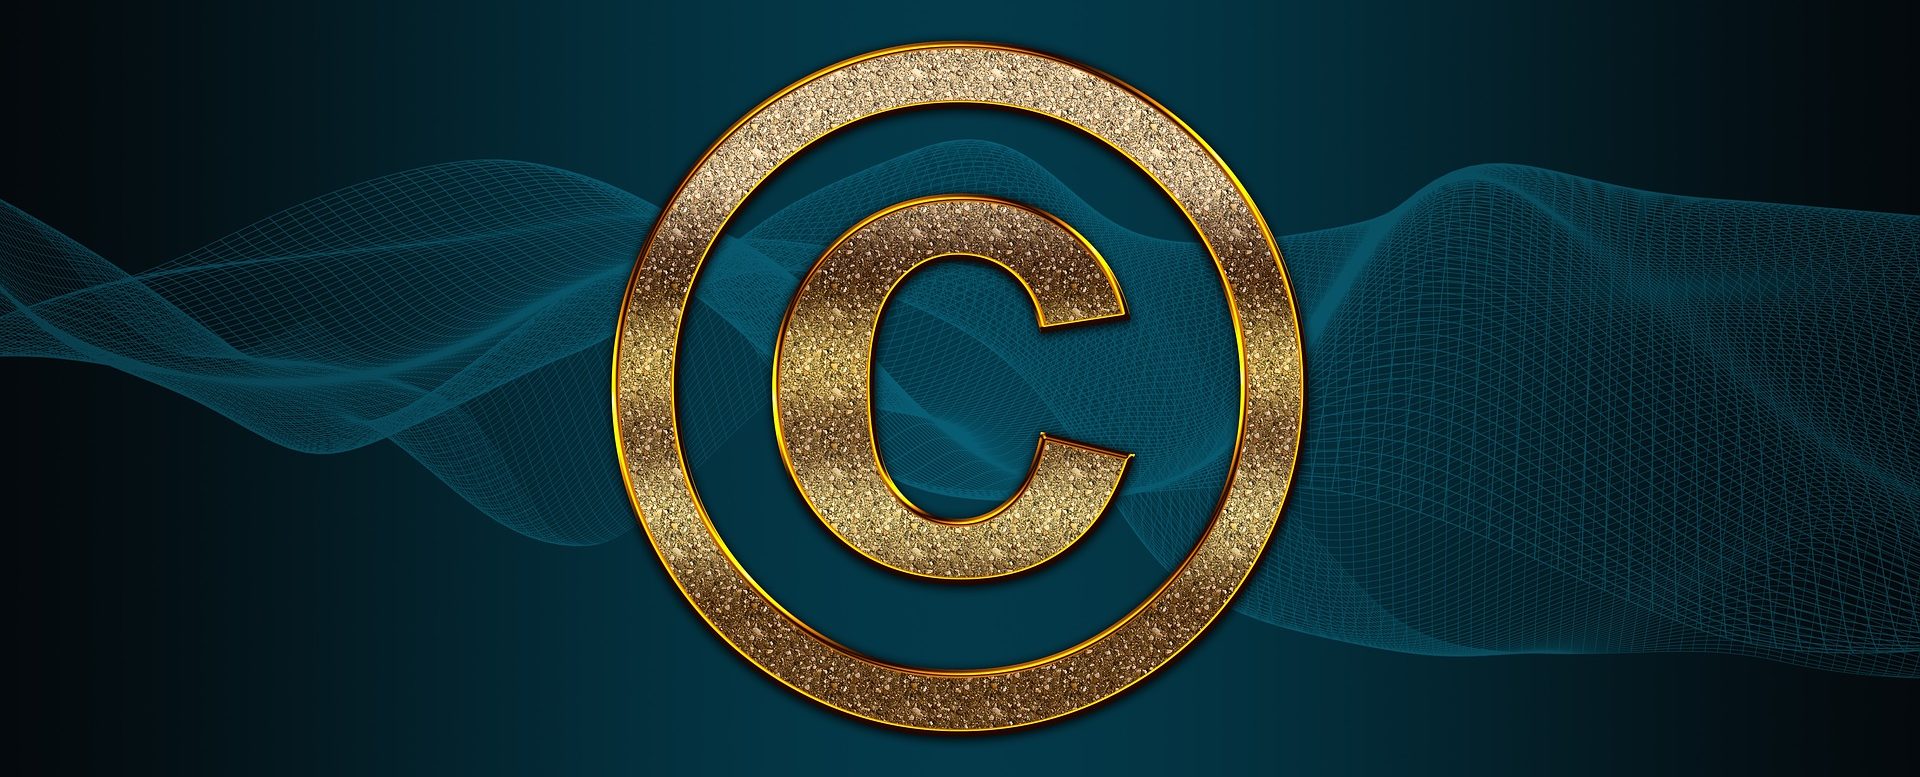 Read more about the article Copyright Infringement and Your Blog: What Images Can I Use Legally?